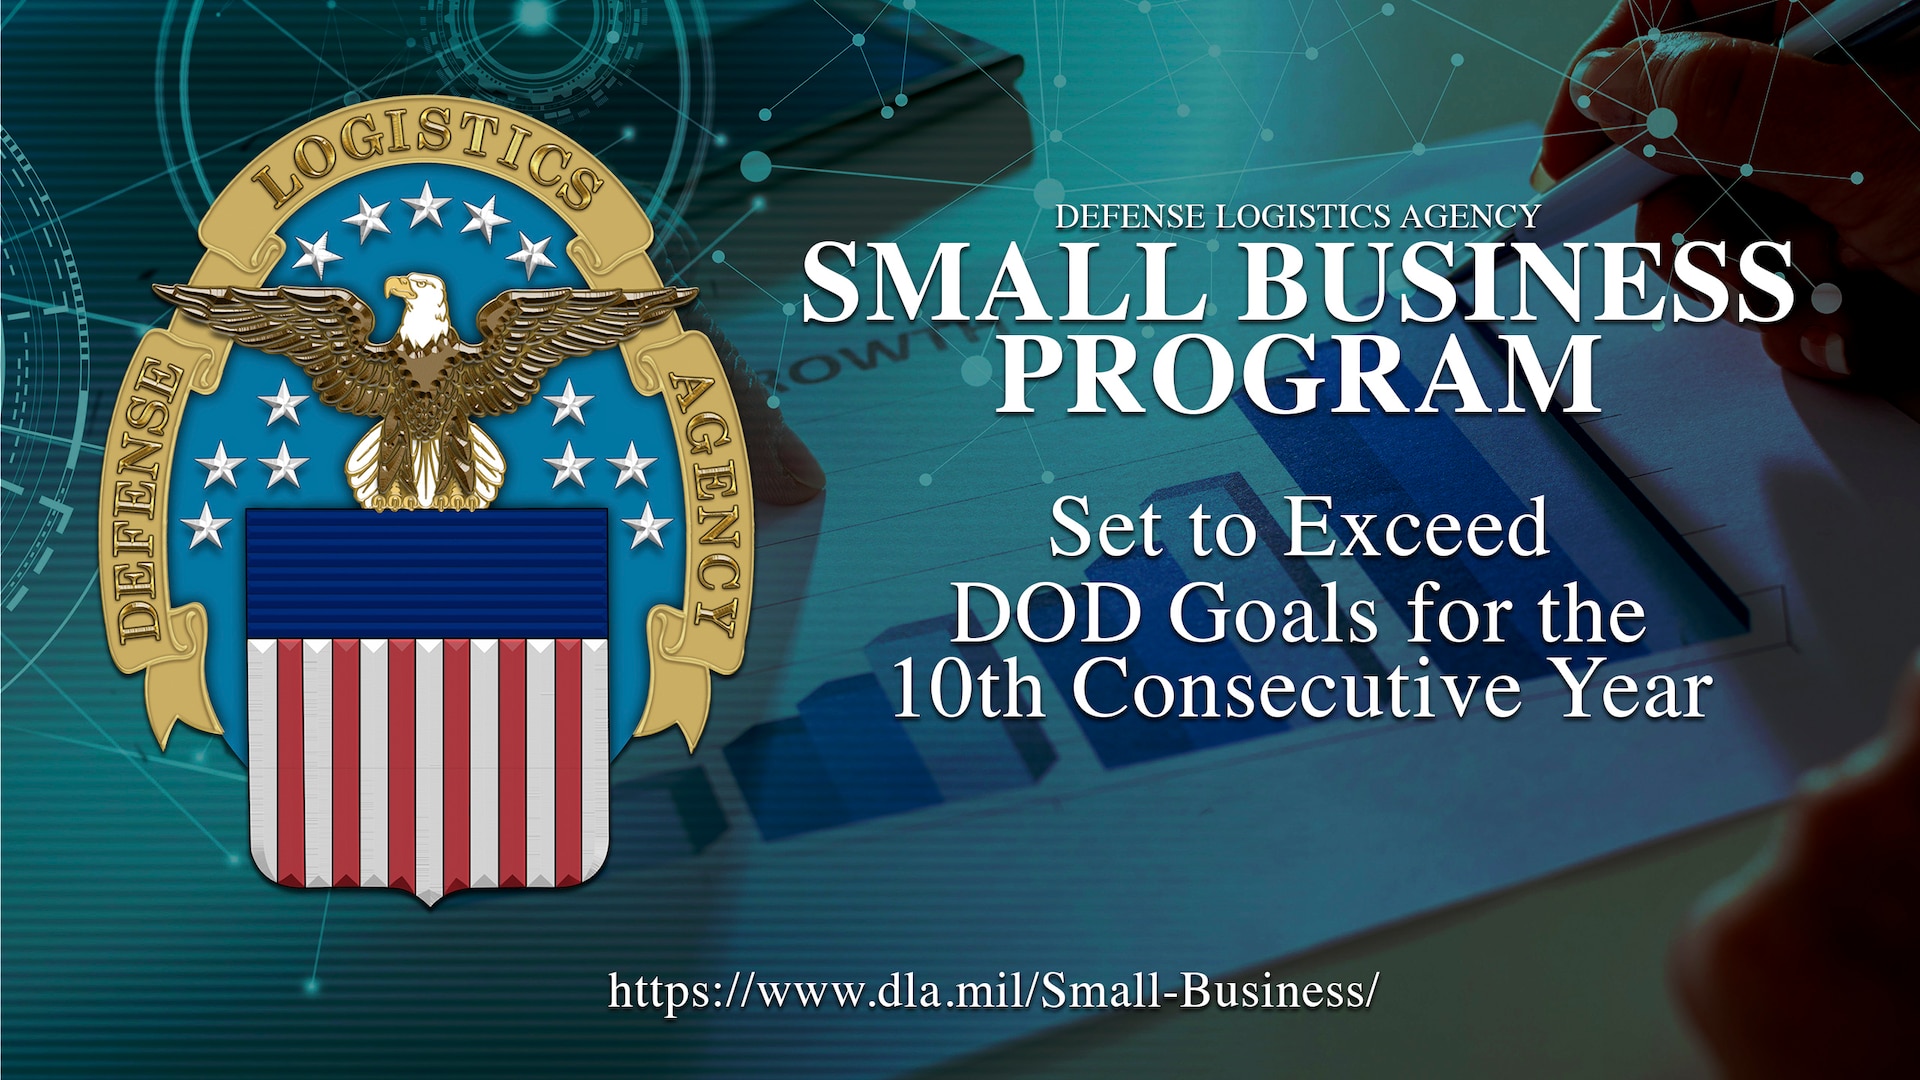 Small business graphic with DLA logo and text with muted financial graph background image.